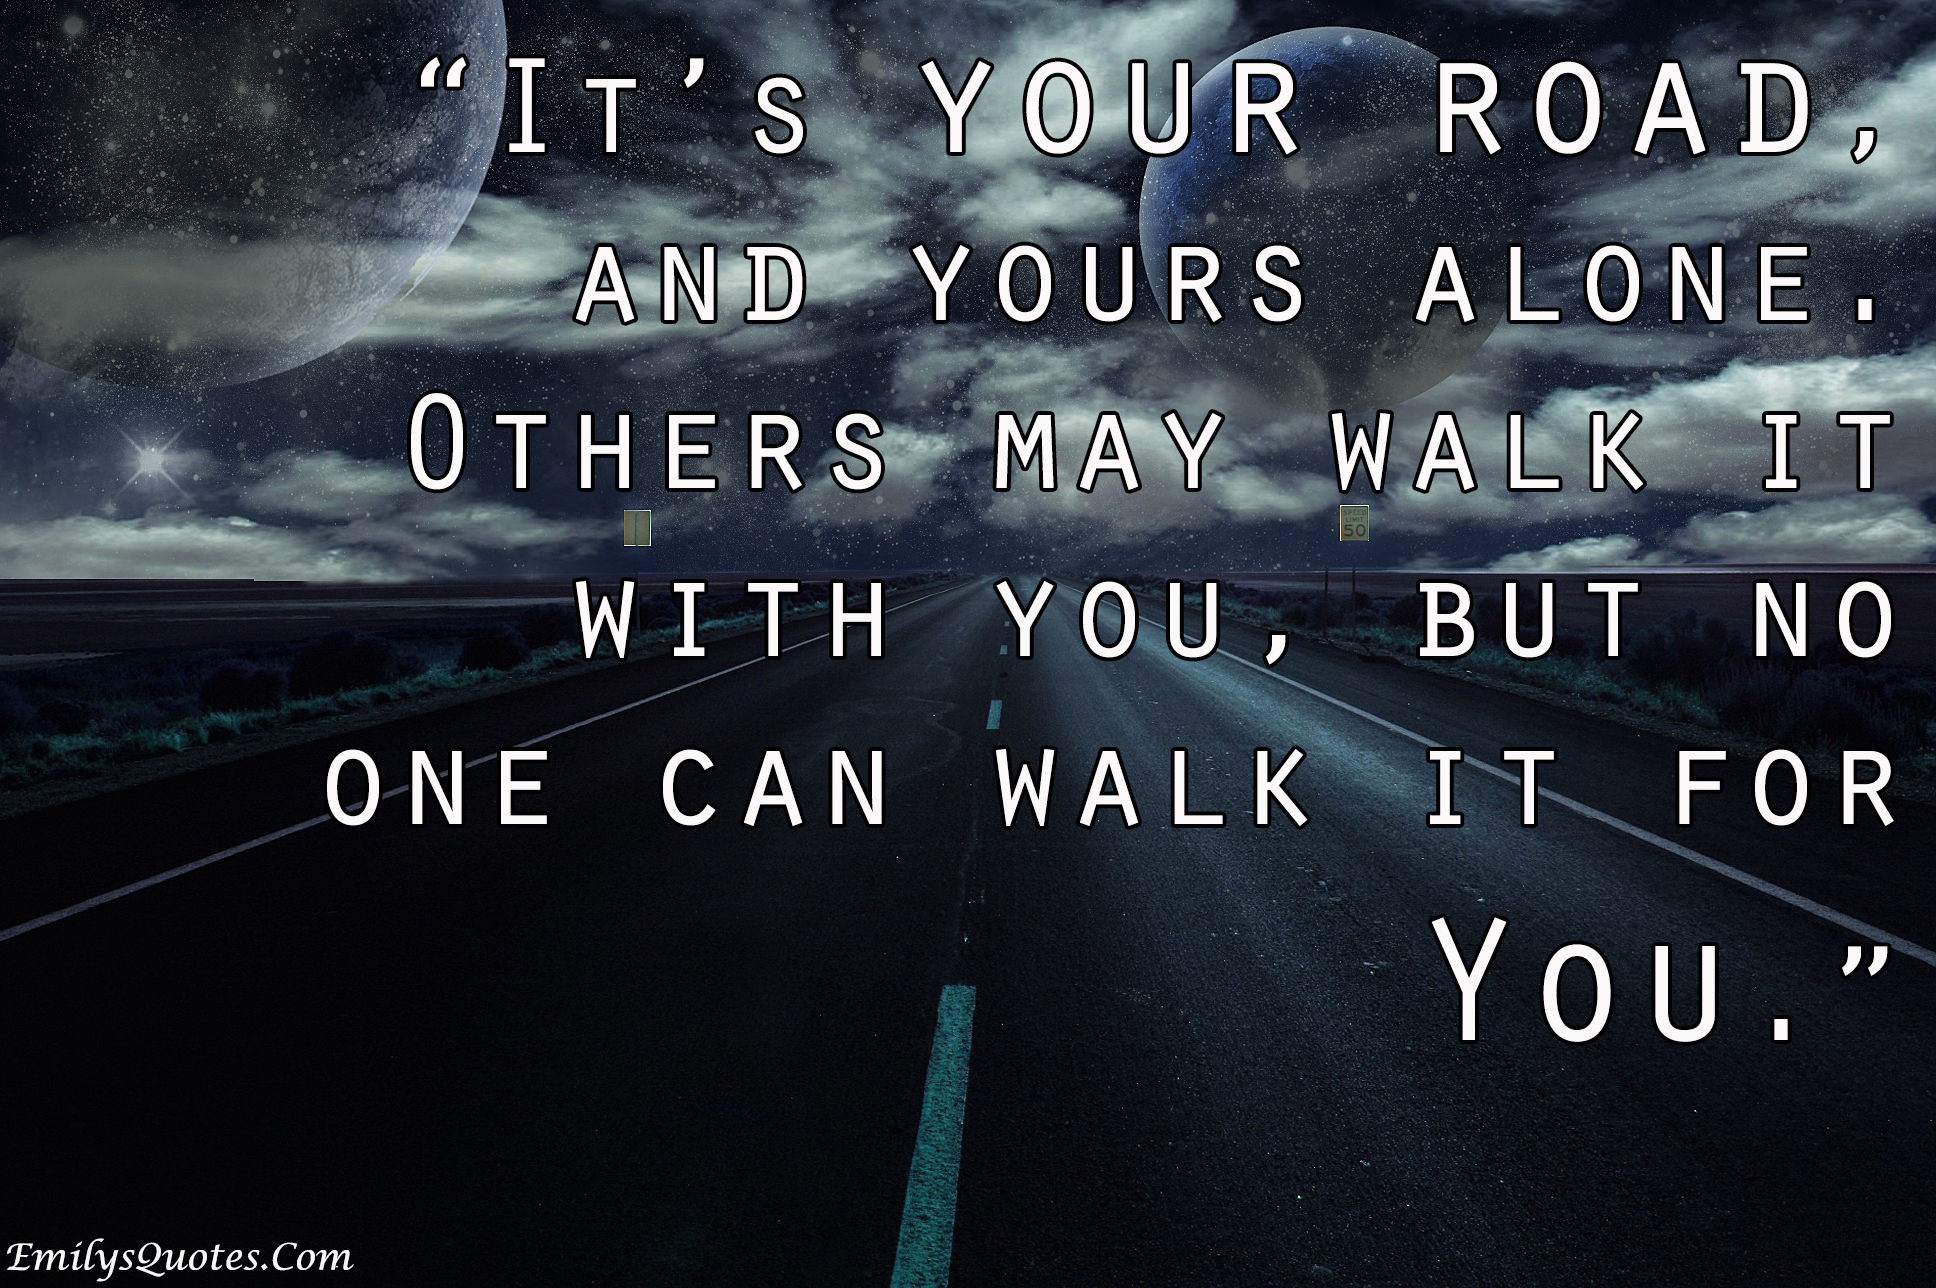 It’s your road and yours alone. Others may walk it with you, but no one can walk it for you